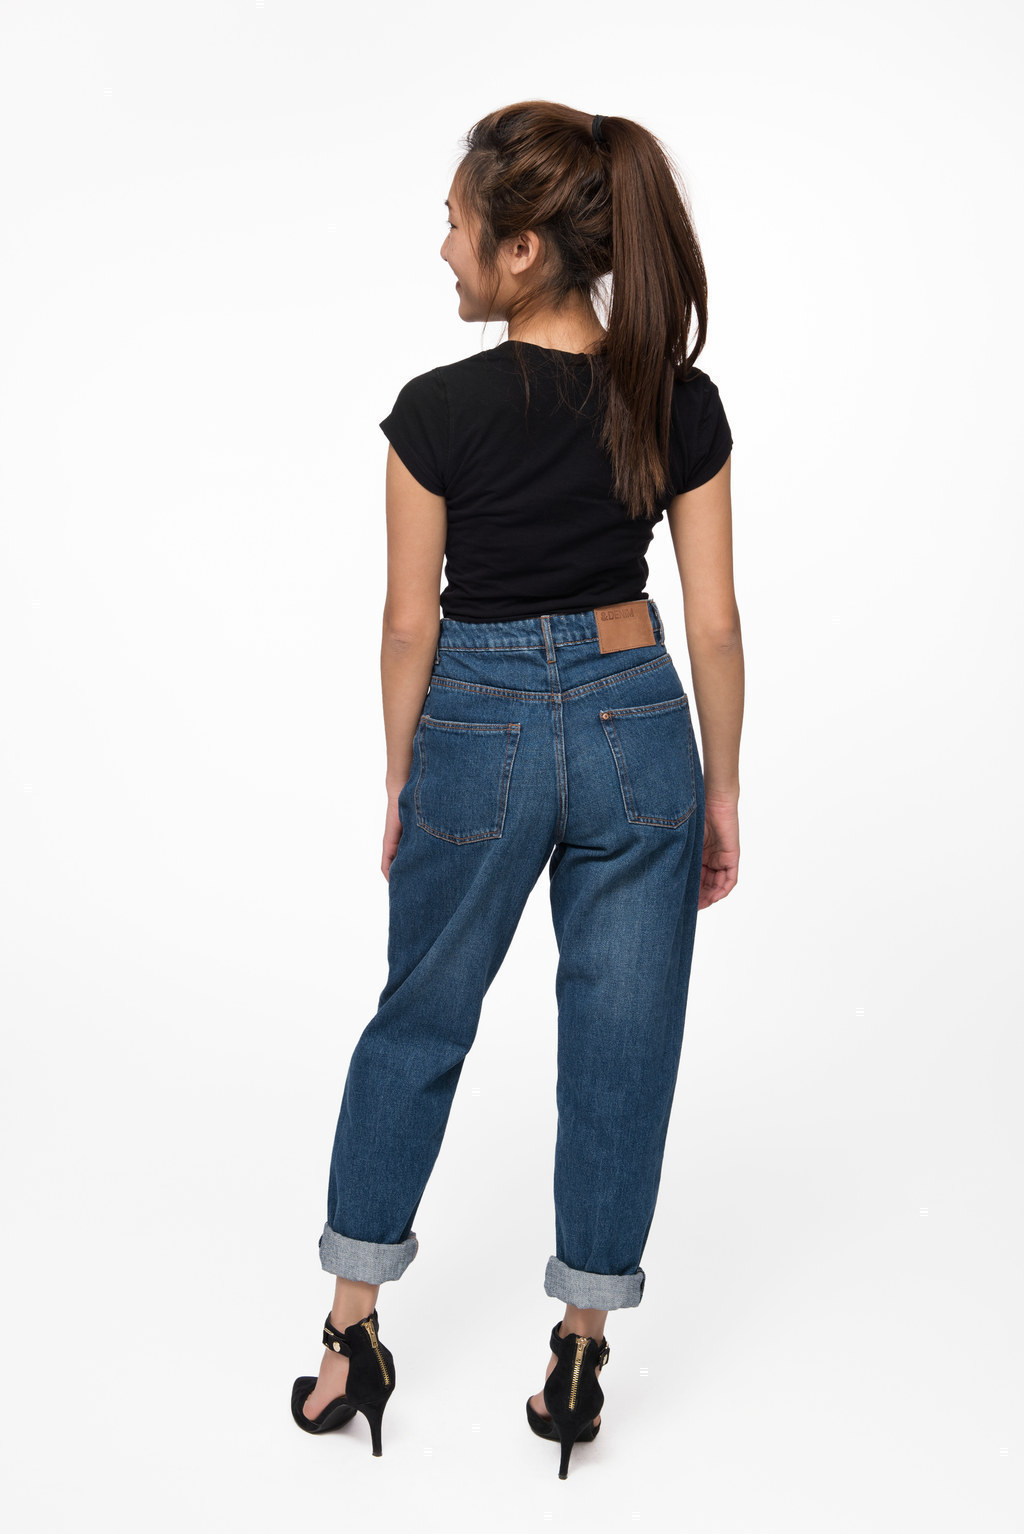 h&m mom fit jeans